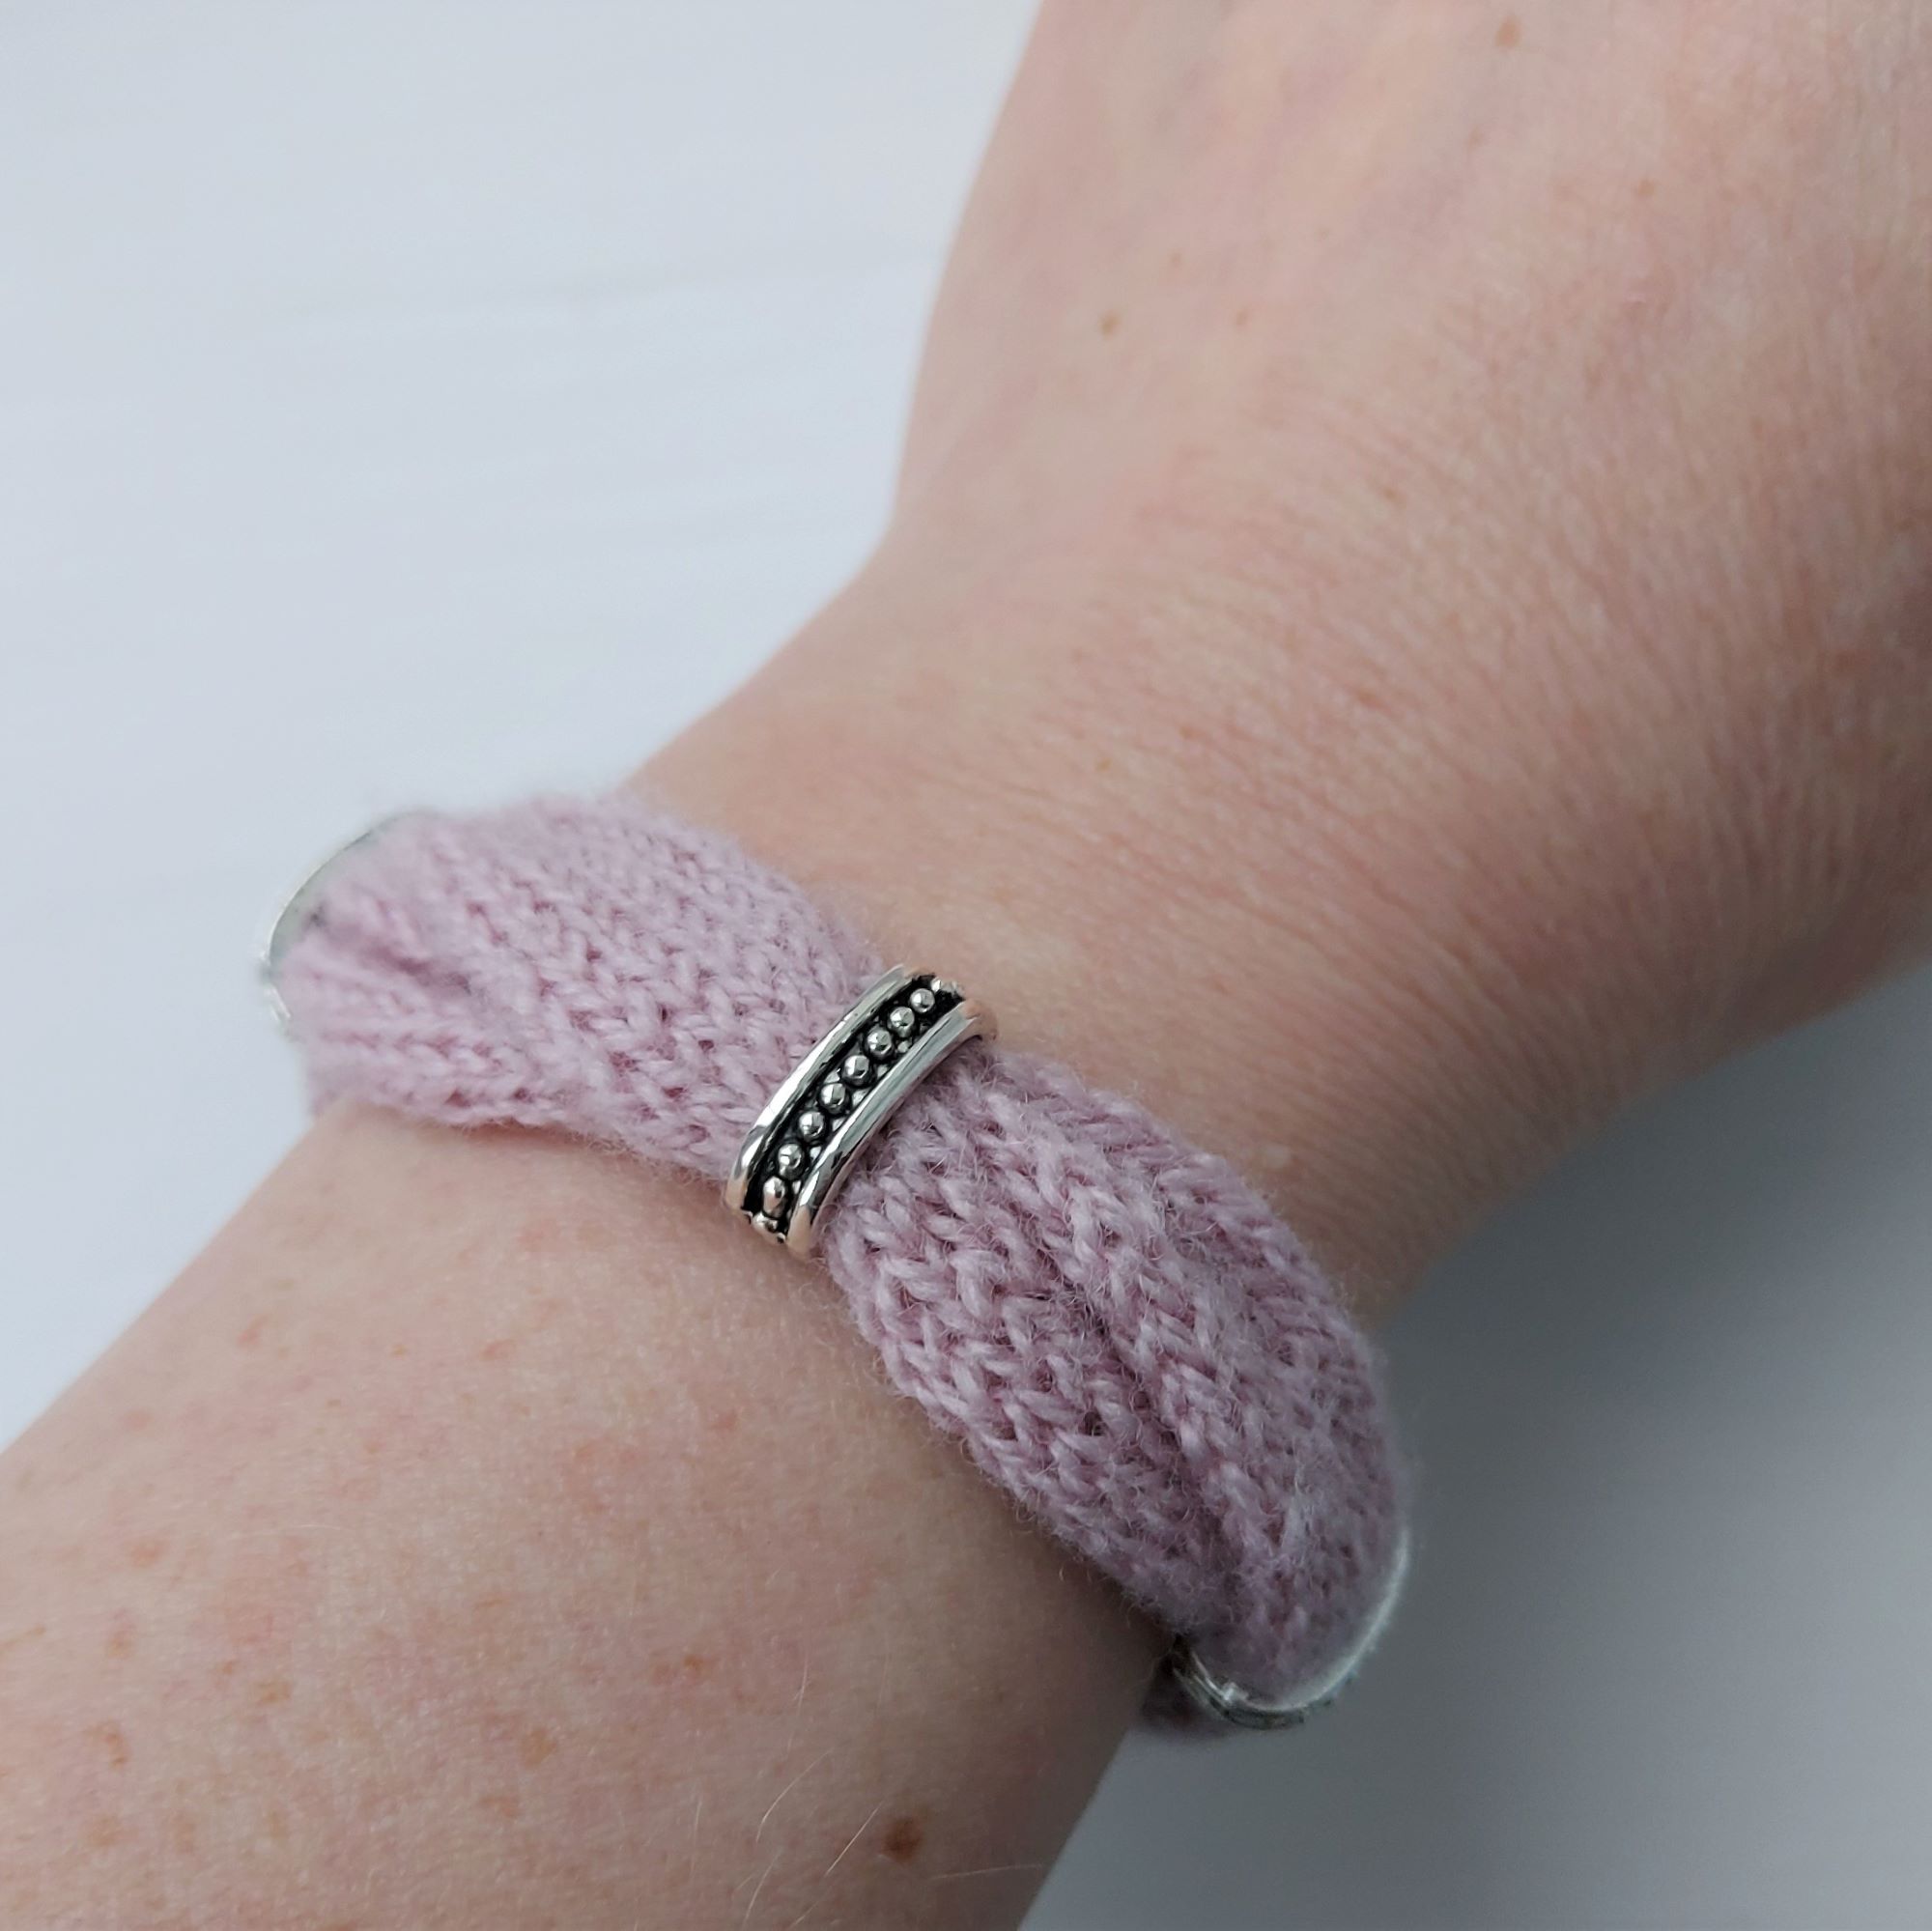 Kids Can Knit Their Own Friendship Bracelets – Knitting